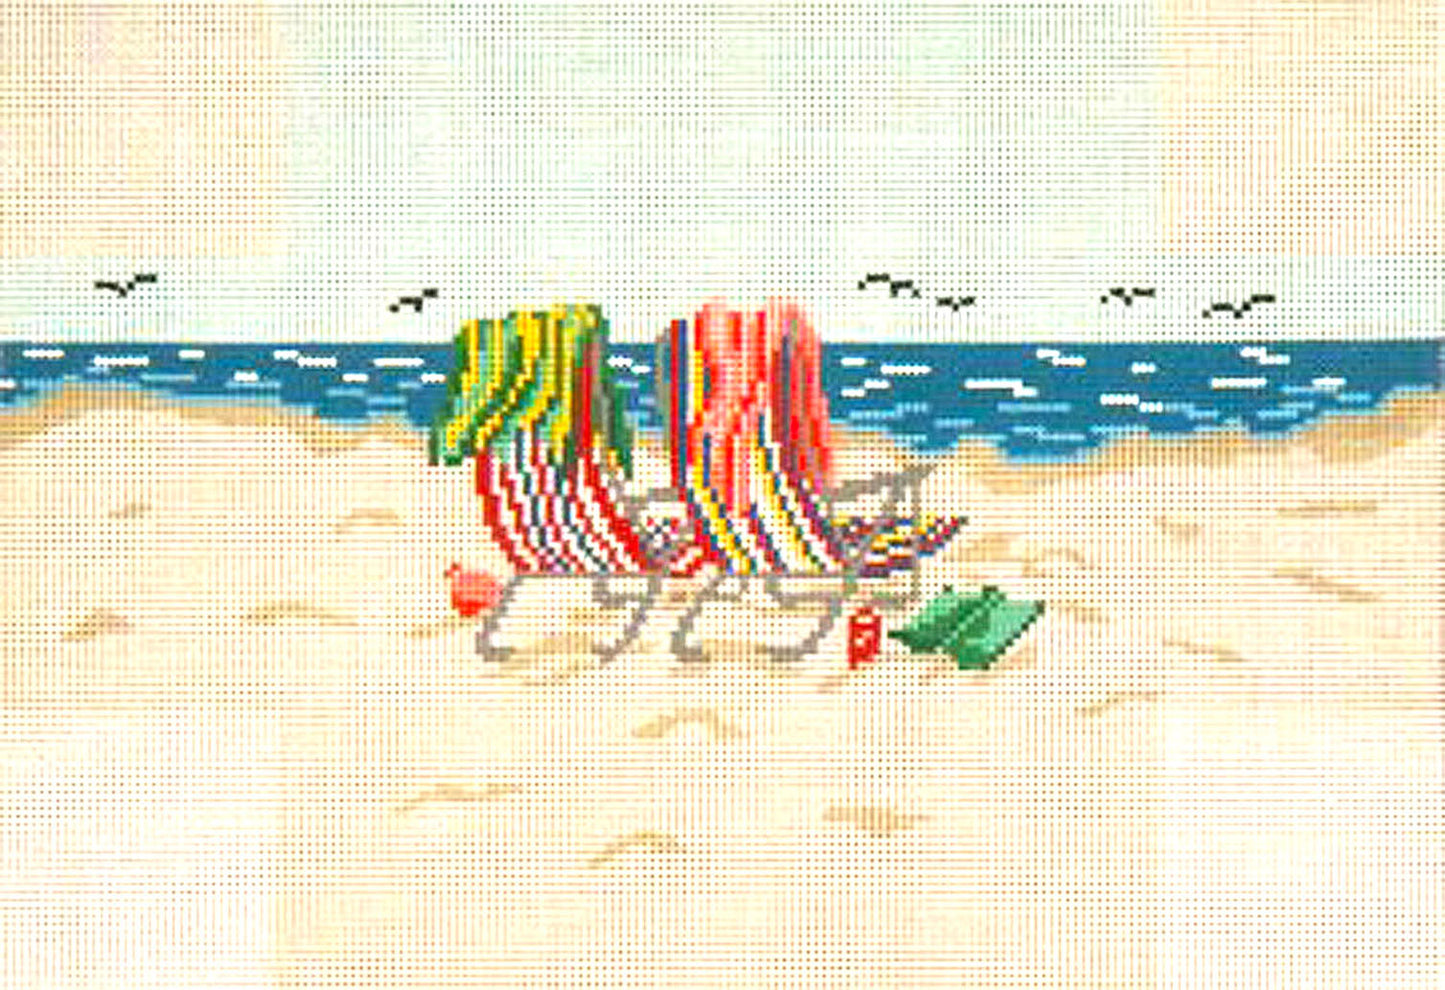 Brick Cover~Beach Chairs handpainted Needlepoint Canvas~by Needle Crossings